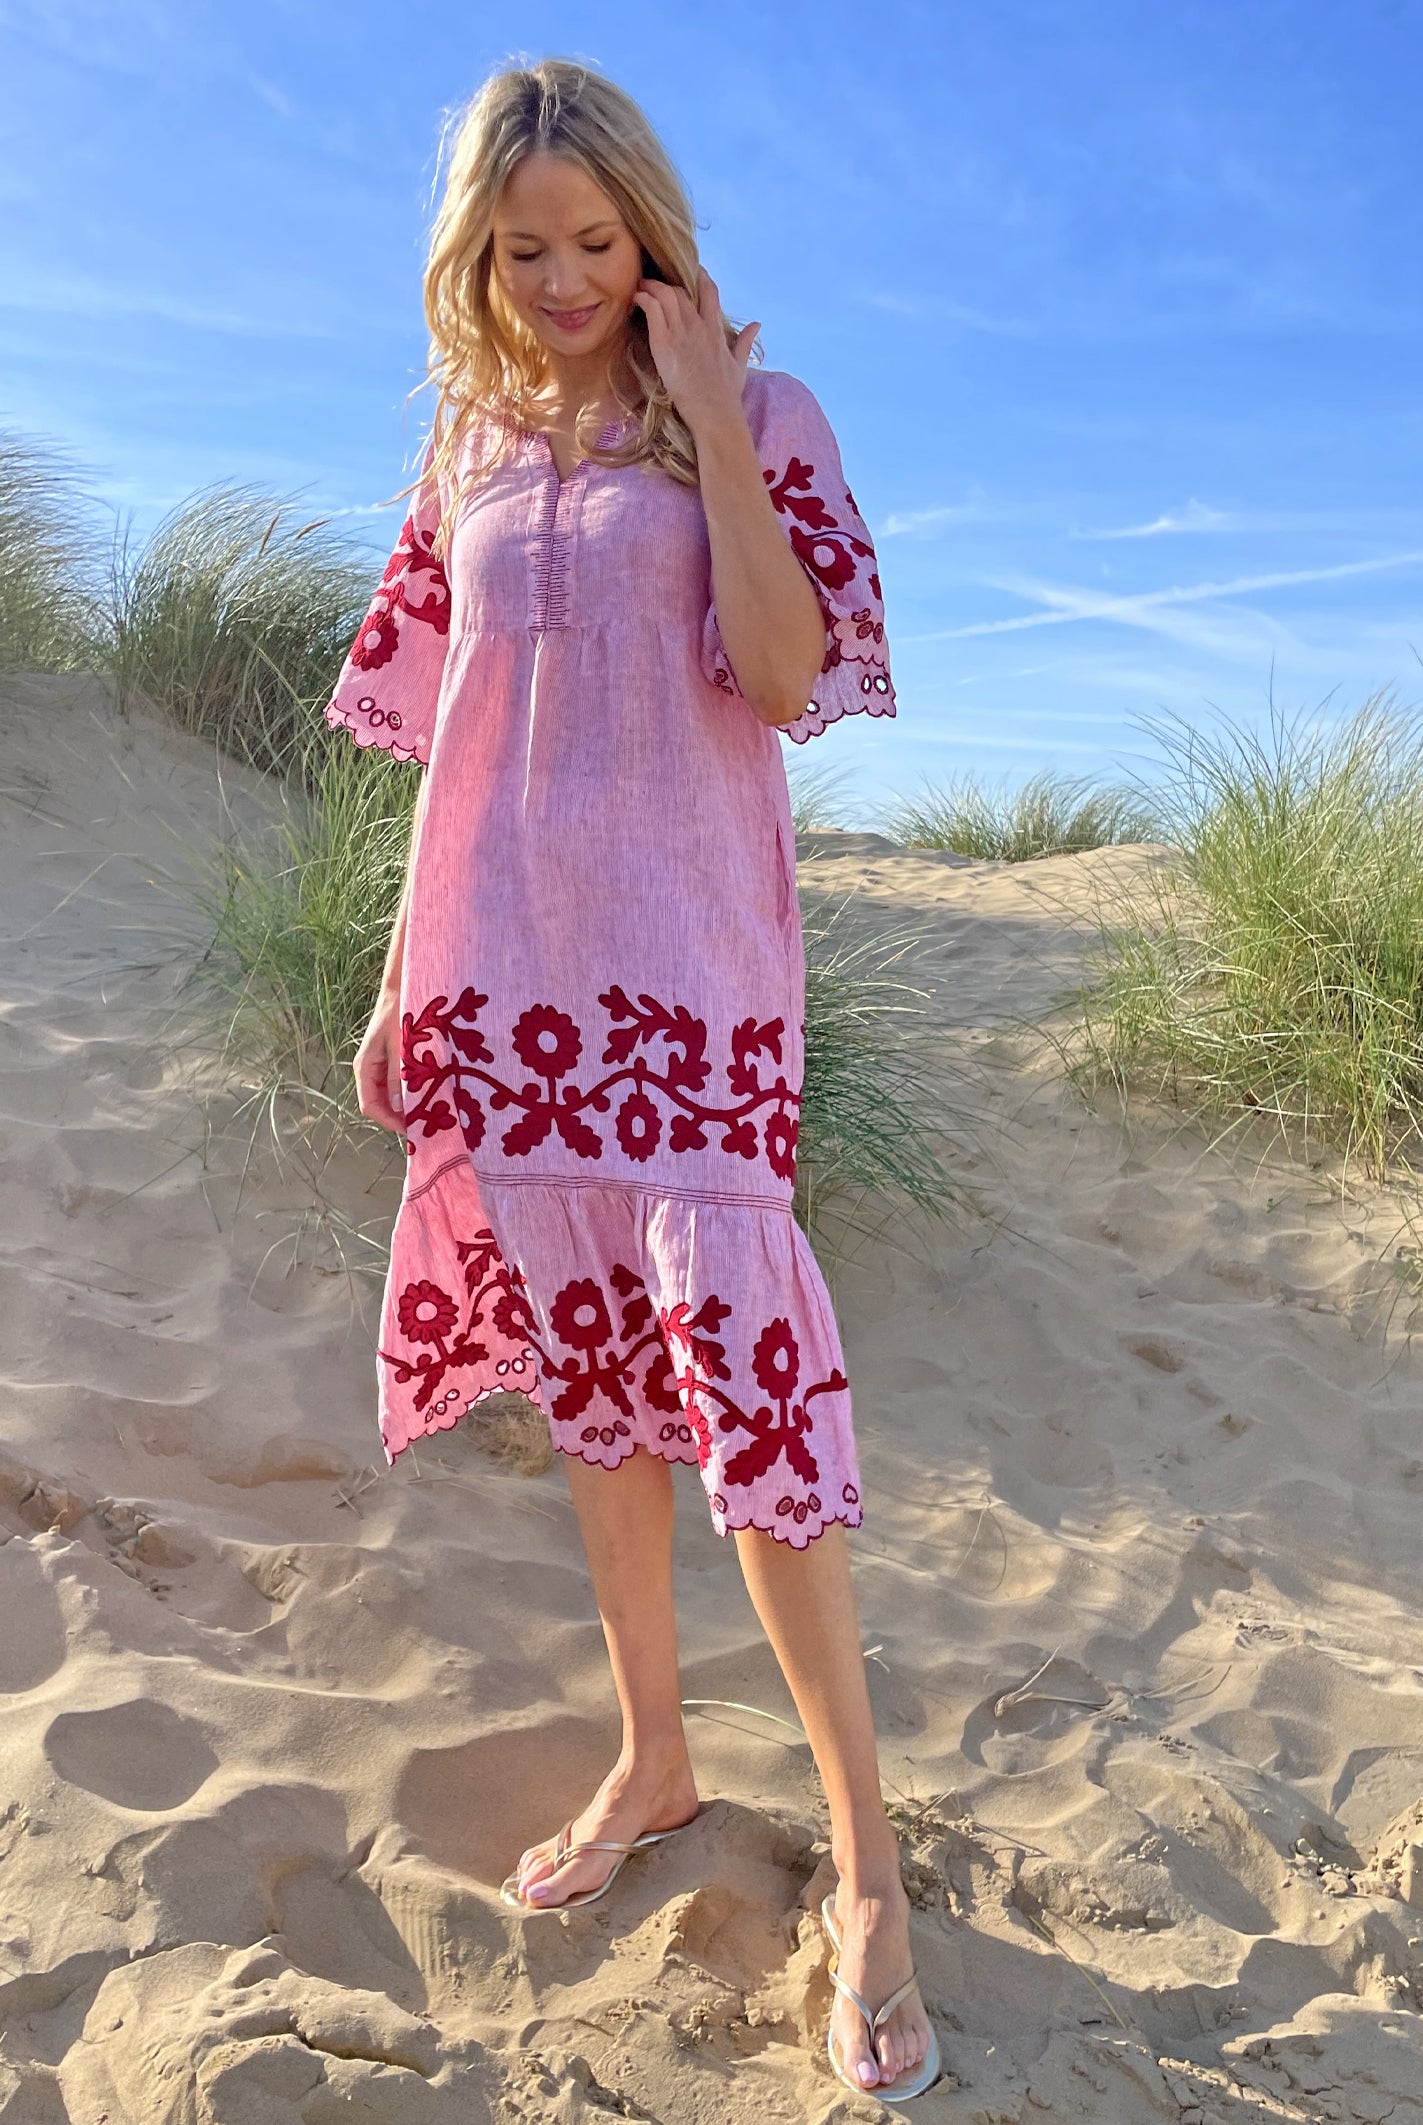 A model stood in sand dunes wearing a Rose and Rose red striped linen Agrigento dress.